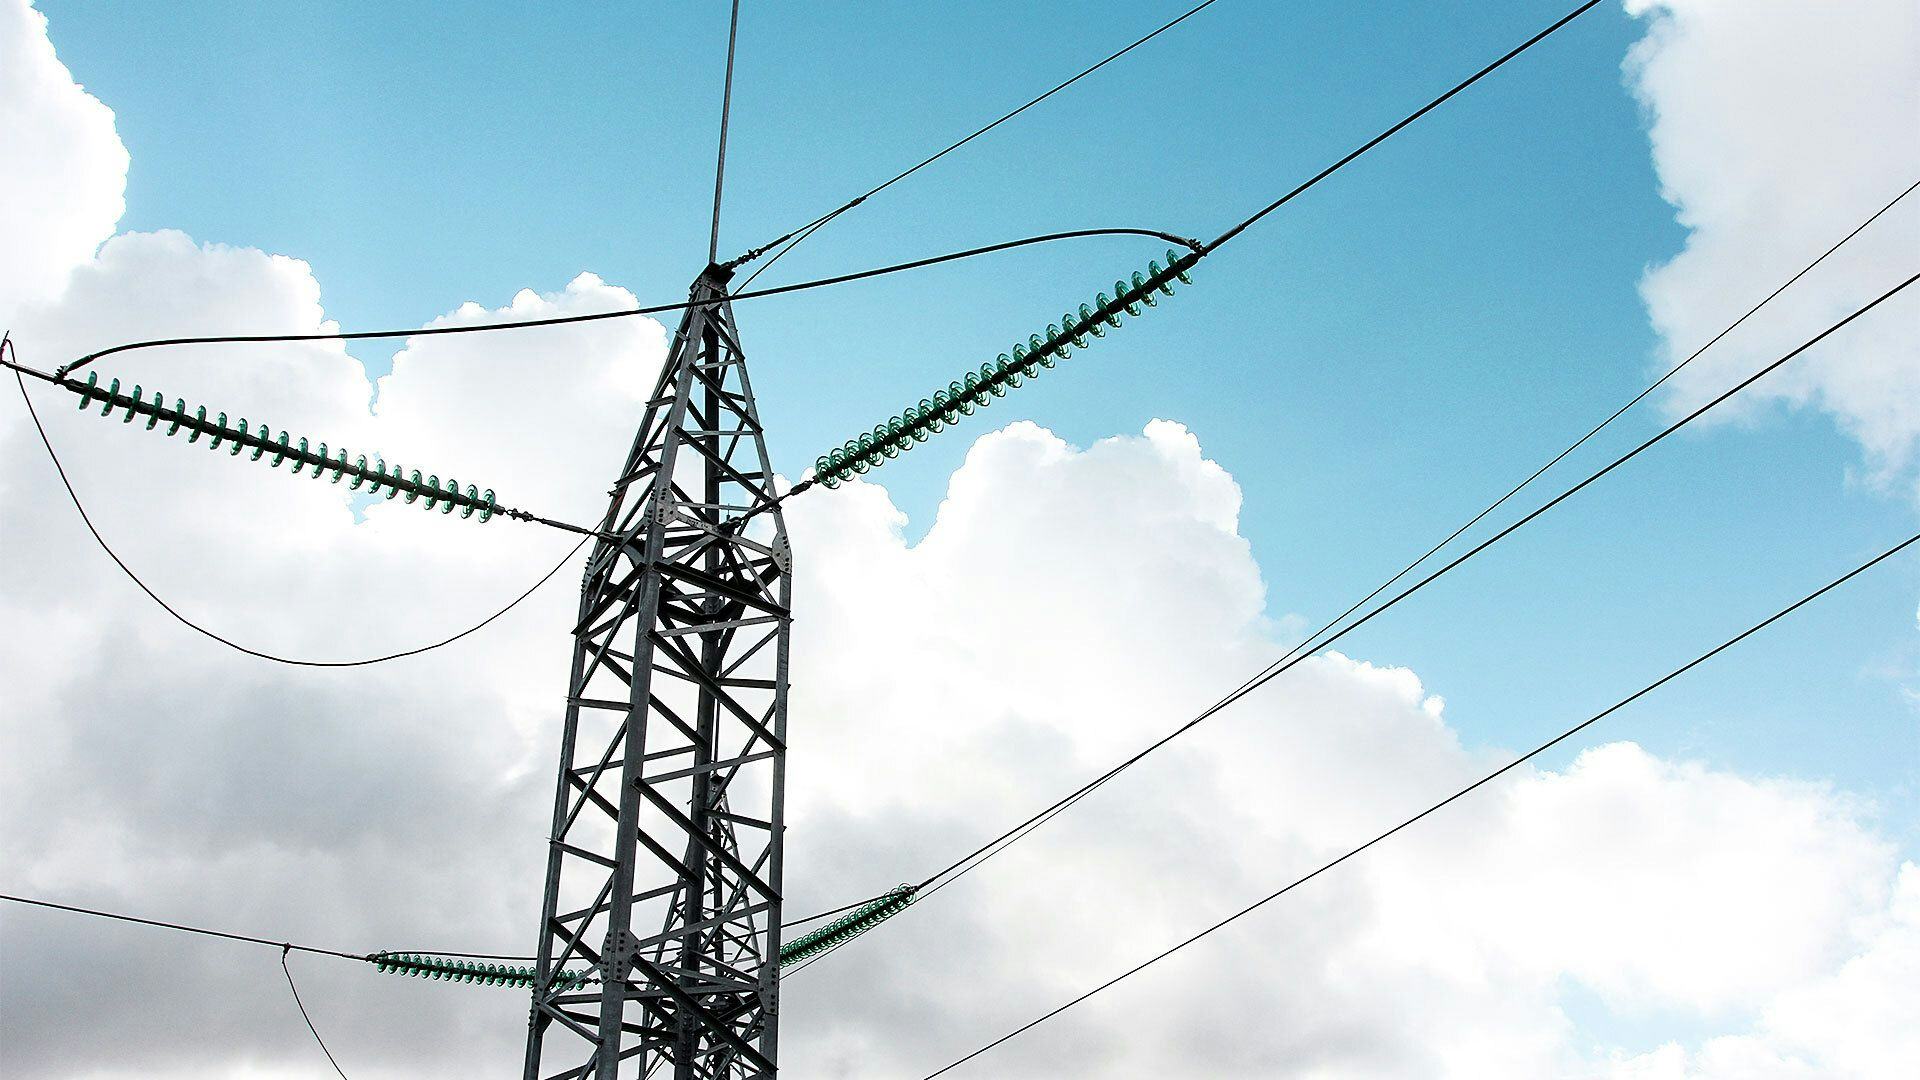 A close up photo of an electricity pylon with multiple cables against a backdrop of a cloudy blue sky